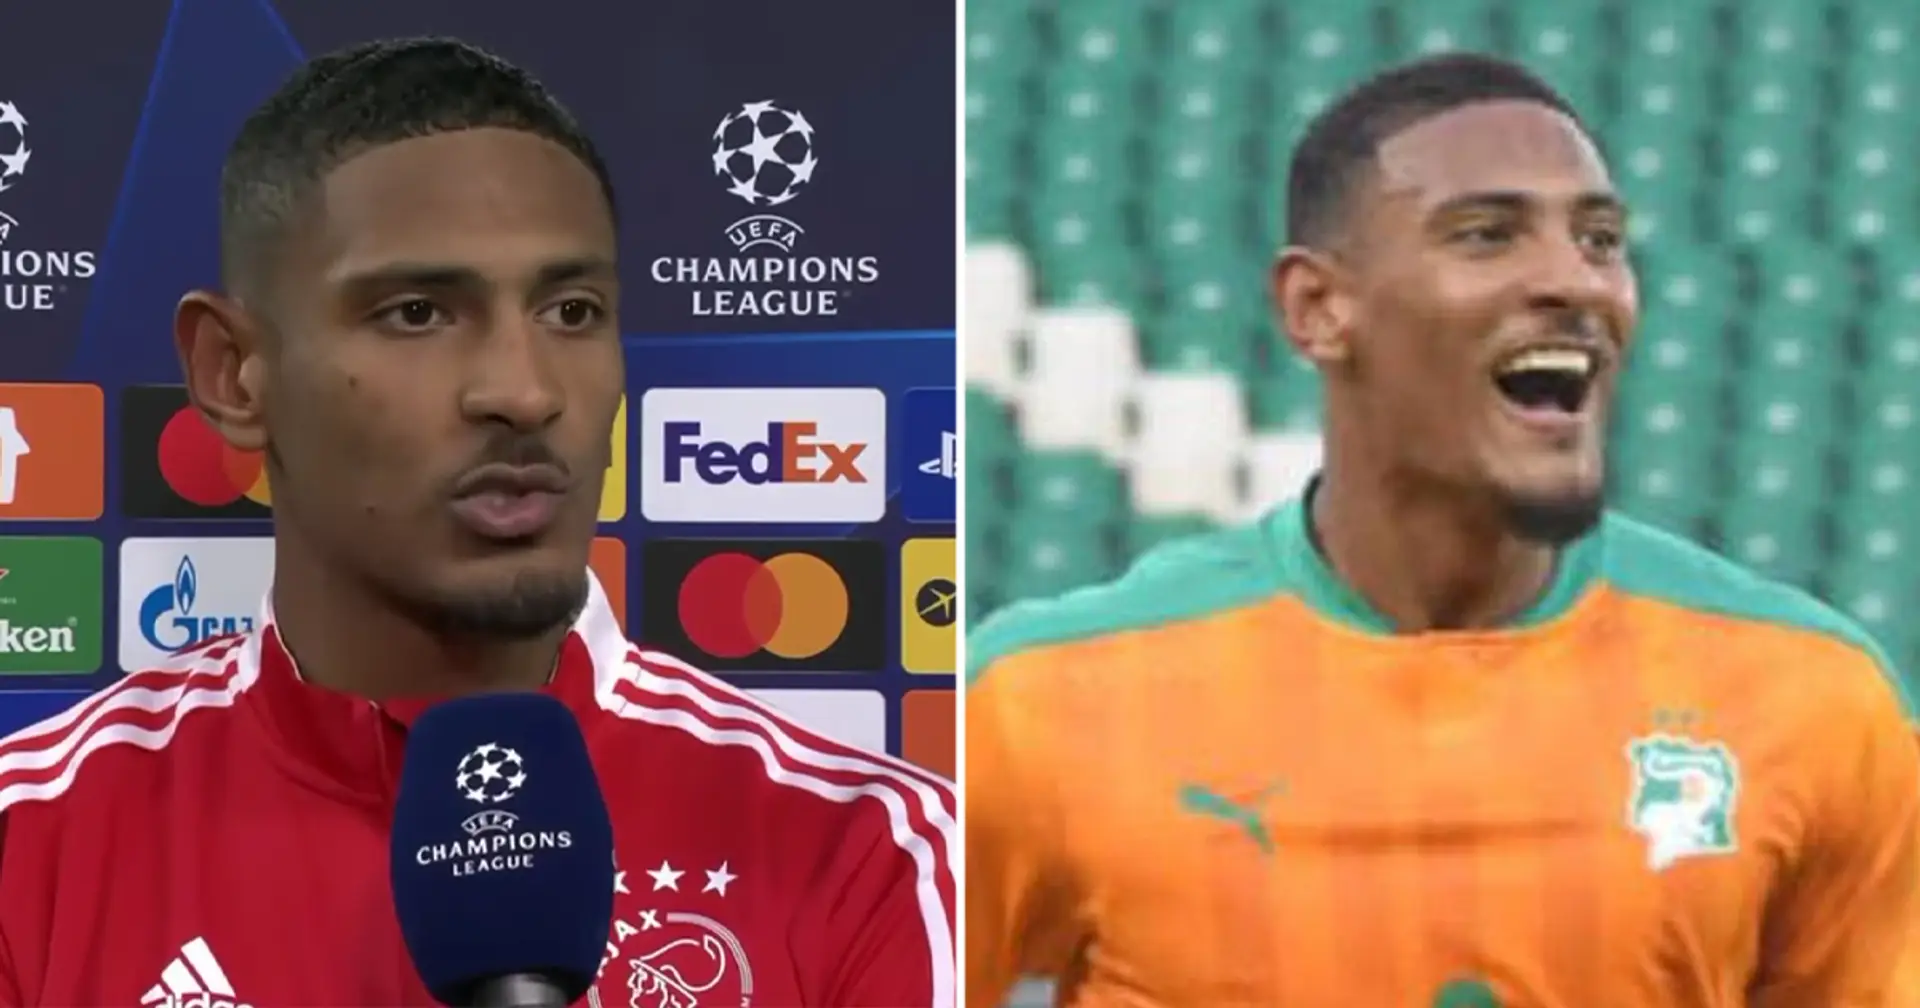 'This shows disrespect for Africa': Ajax forward Haller hits out at reporter for AFCON question